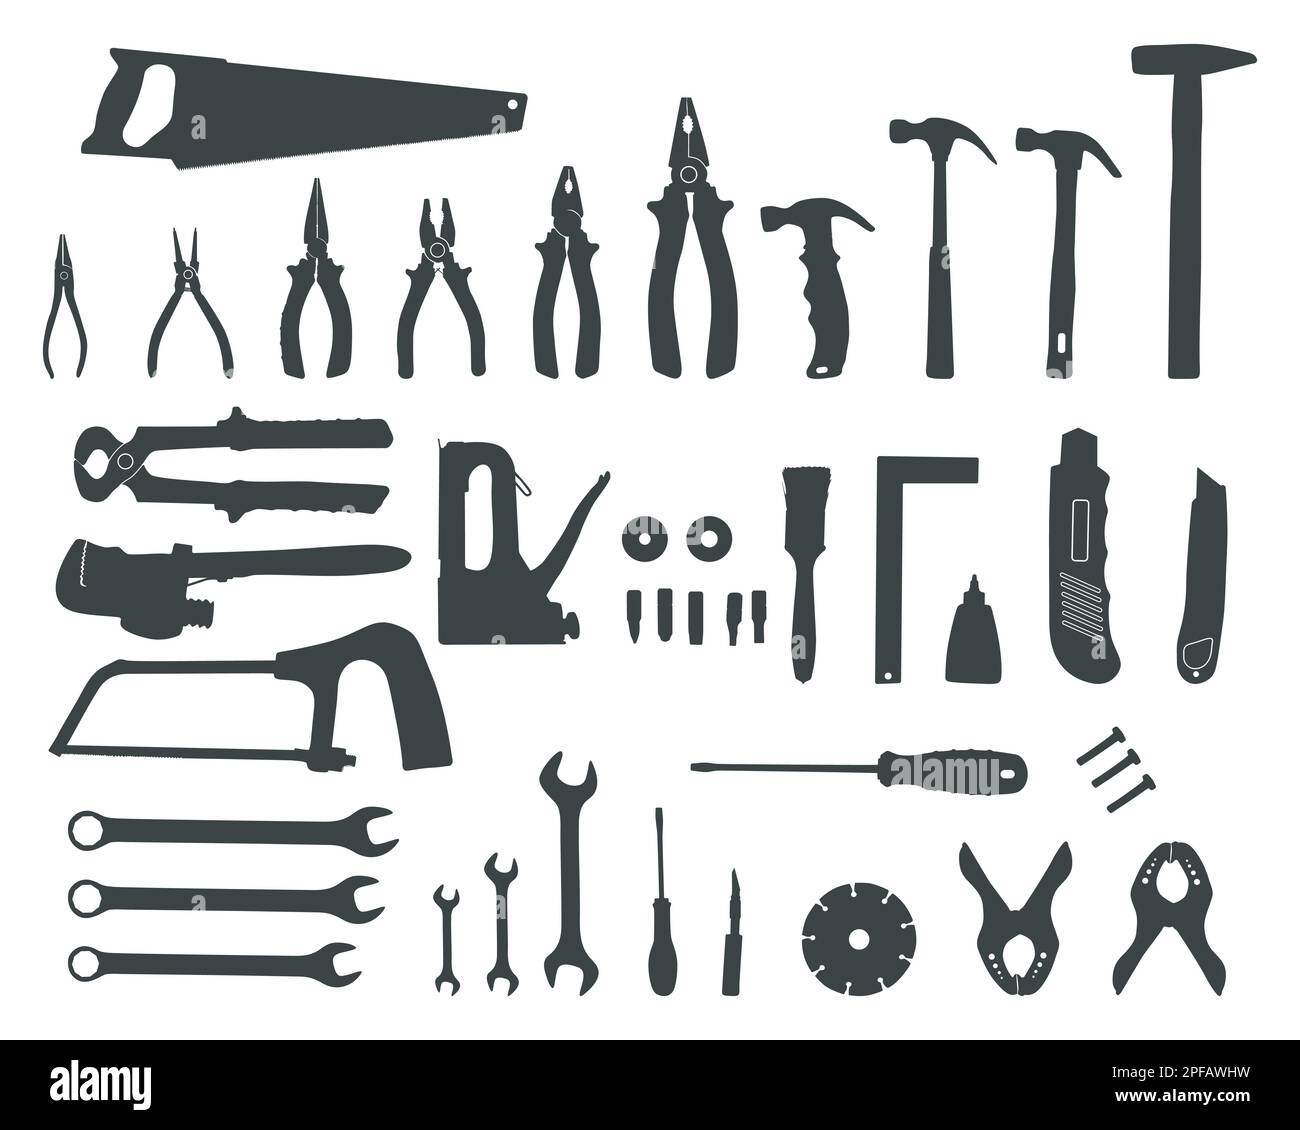 Hand tool silhouettes, Tools silhouettes, Construction tools silhouettes, Tools SVG Stock Vector